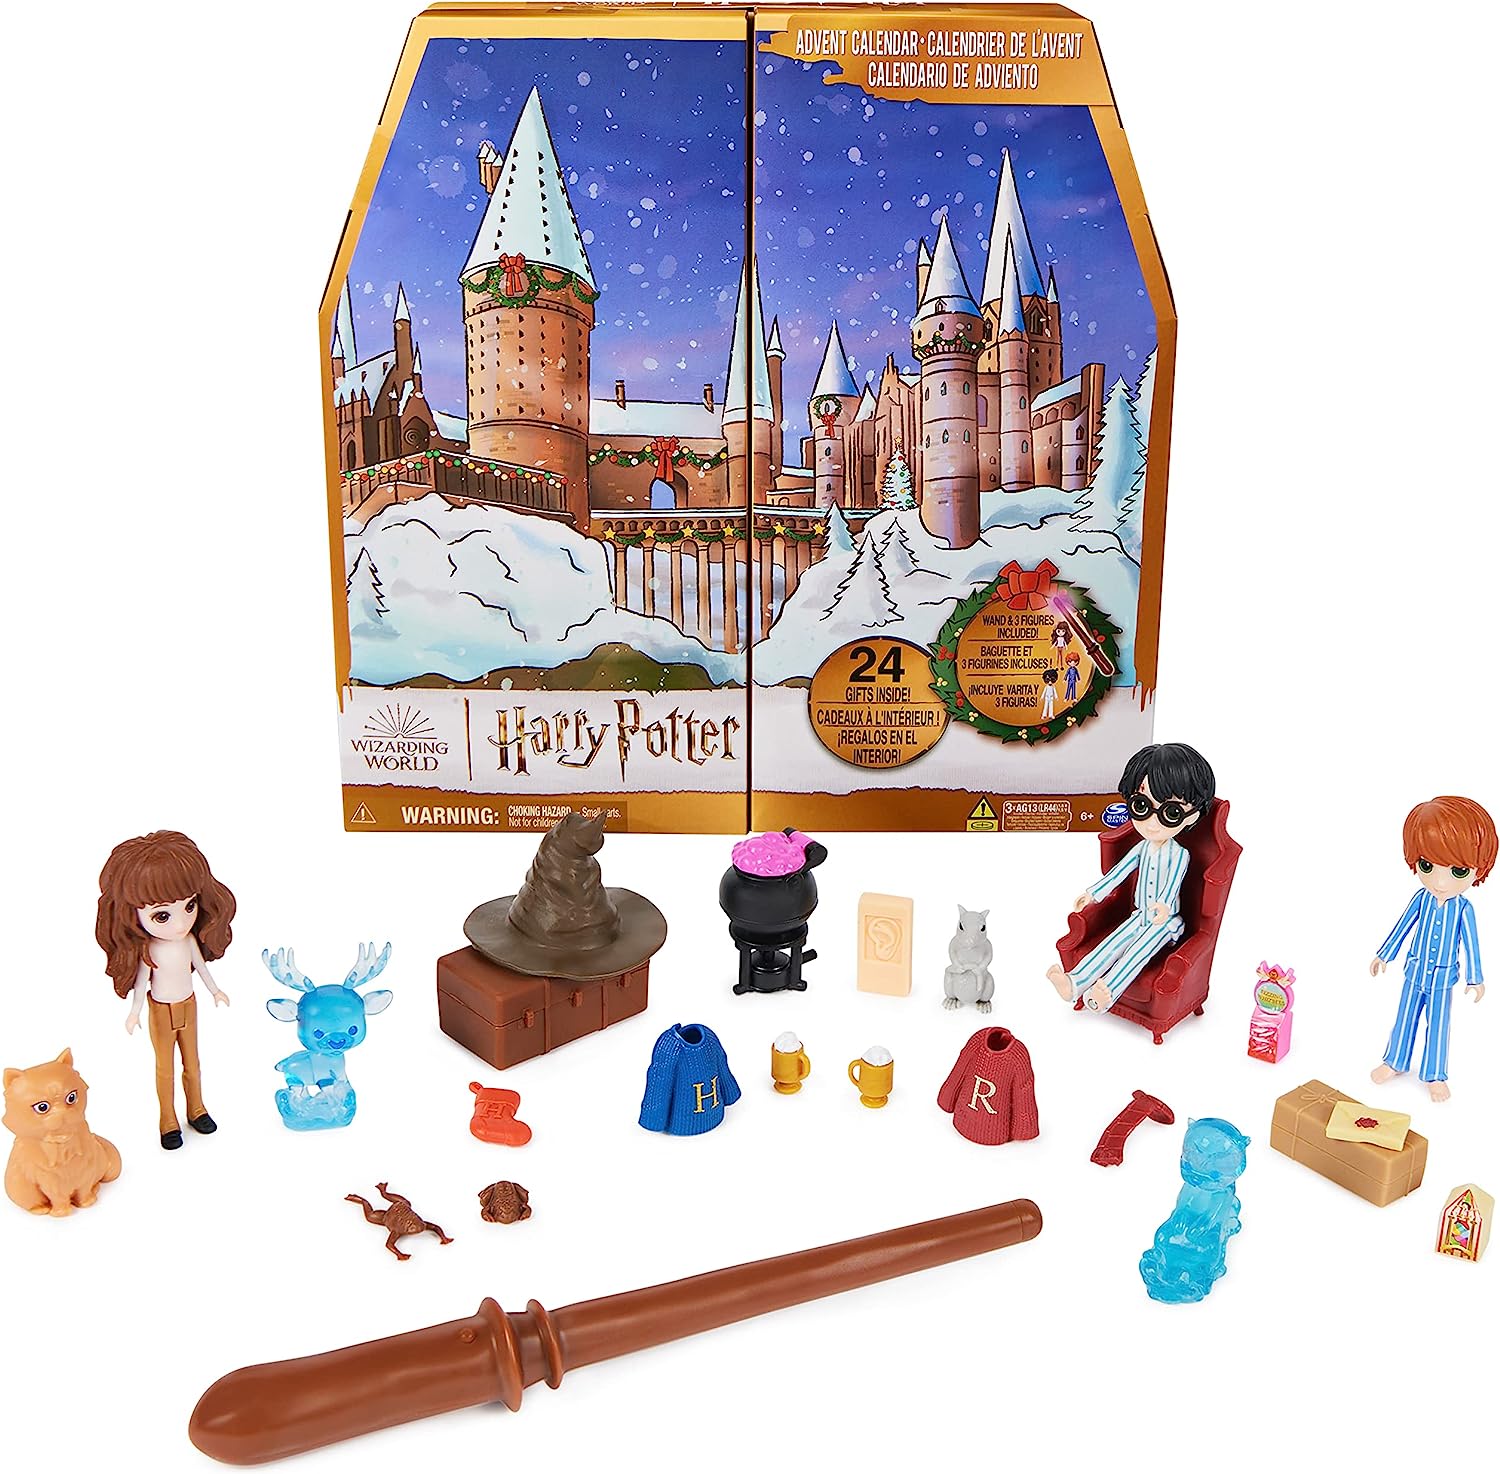 BAGUETTE SURPRISE - HARRY POTTER (MYSTERY WAND)